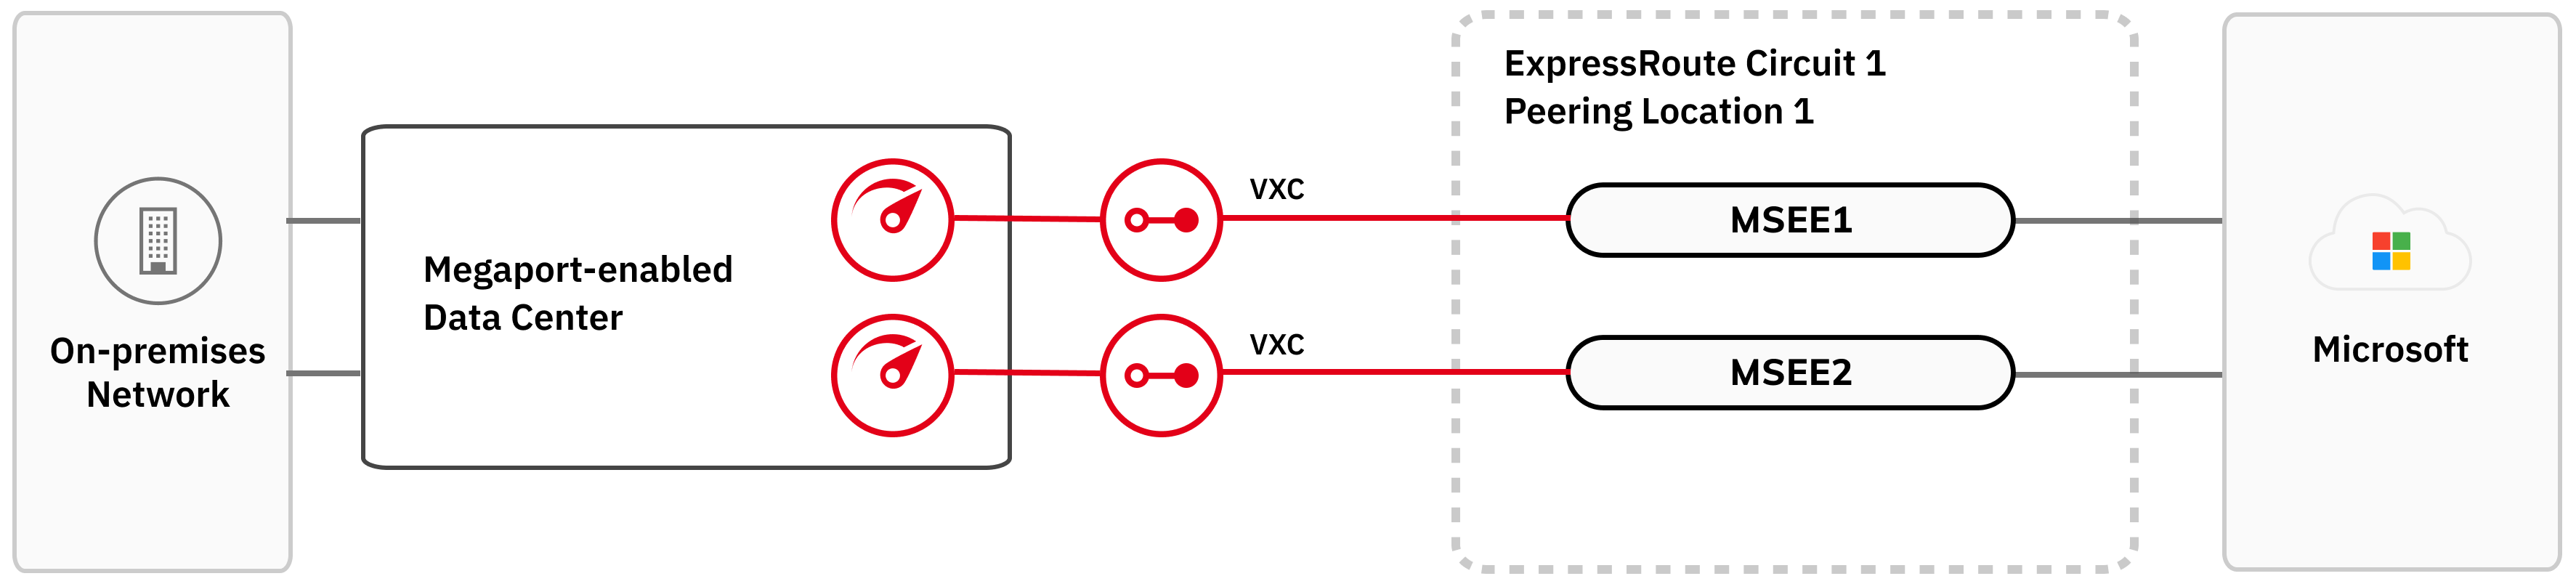 This image shows the structure of ExpressRoute standard resiliency. On the left is the customer on-premises network. This is linked to two Ports in a Megaport enabled data center. The Ports are linked by two VXCs to an MSEE in an  ExpressRoute peering location.